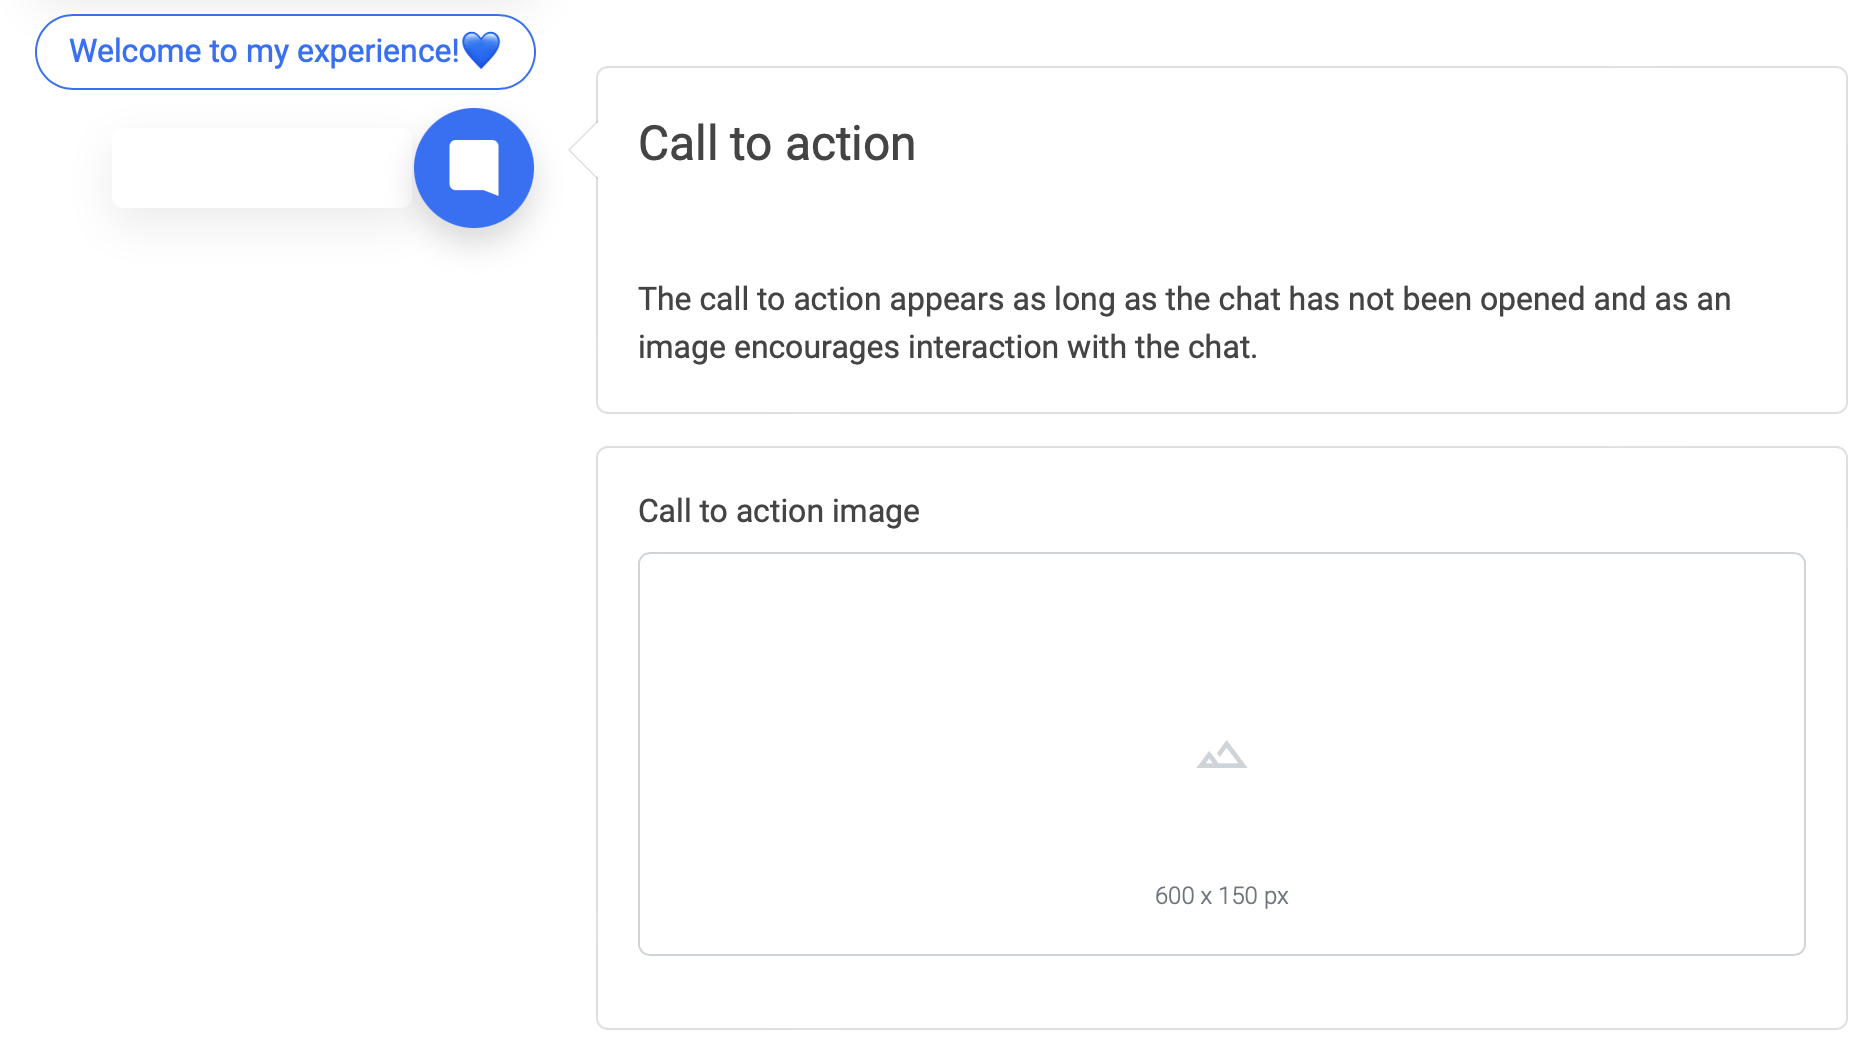 Chat Call to action